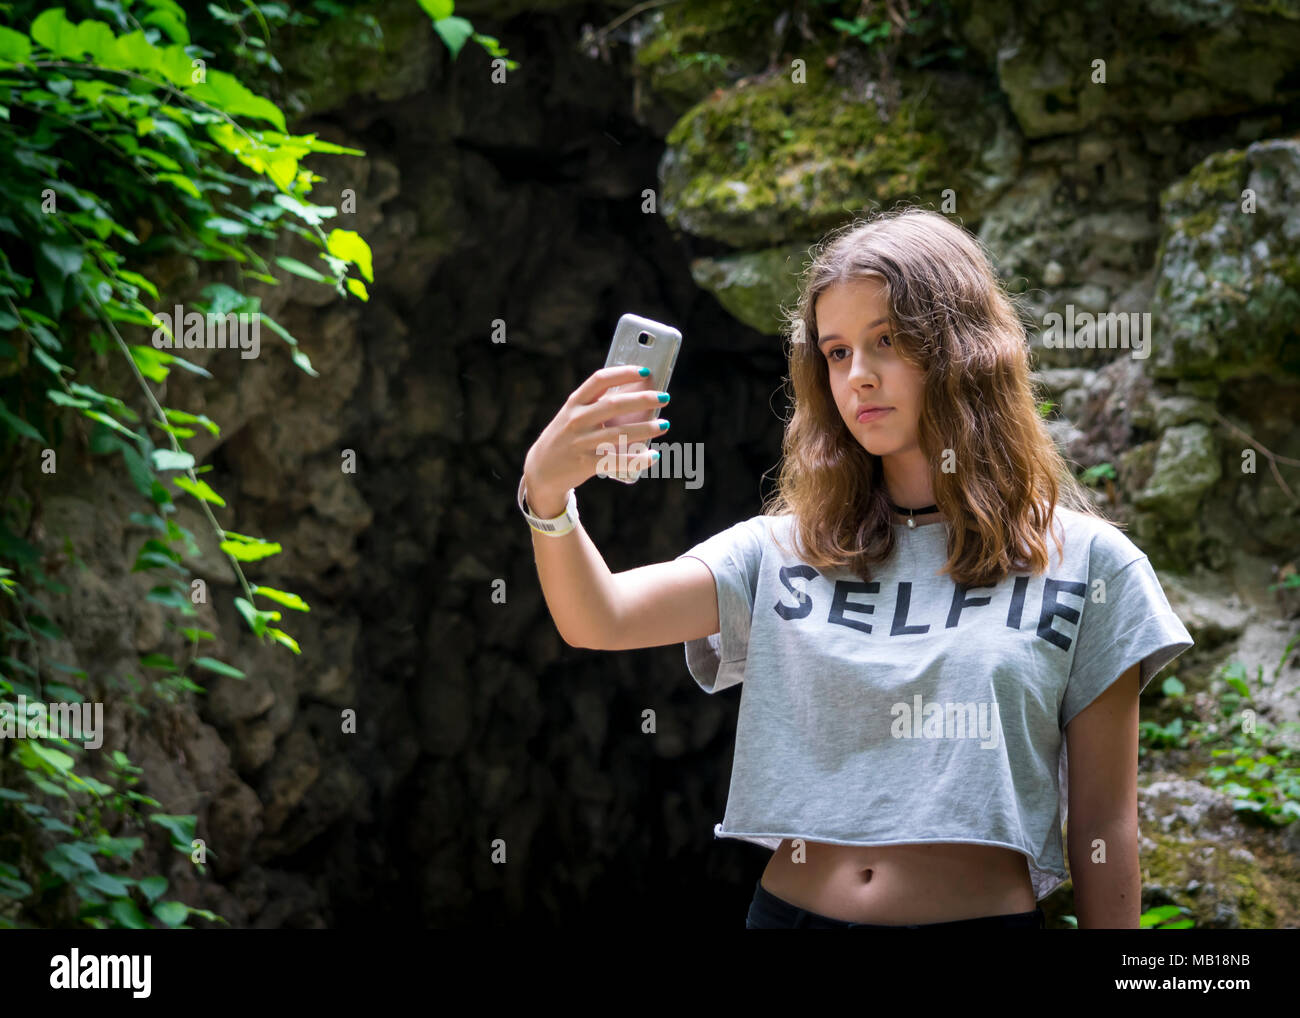 Pretty, teen girl portrait, long hair, outdoors, takes selfie with phone. Portrait of beautiful Caucasian teenage girl in grey top with selfie sign. Stock Photo